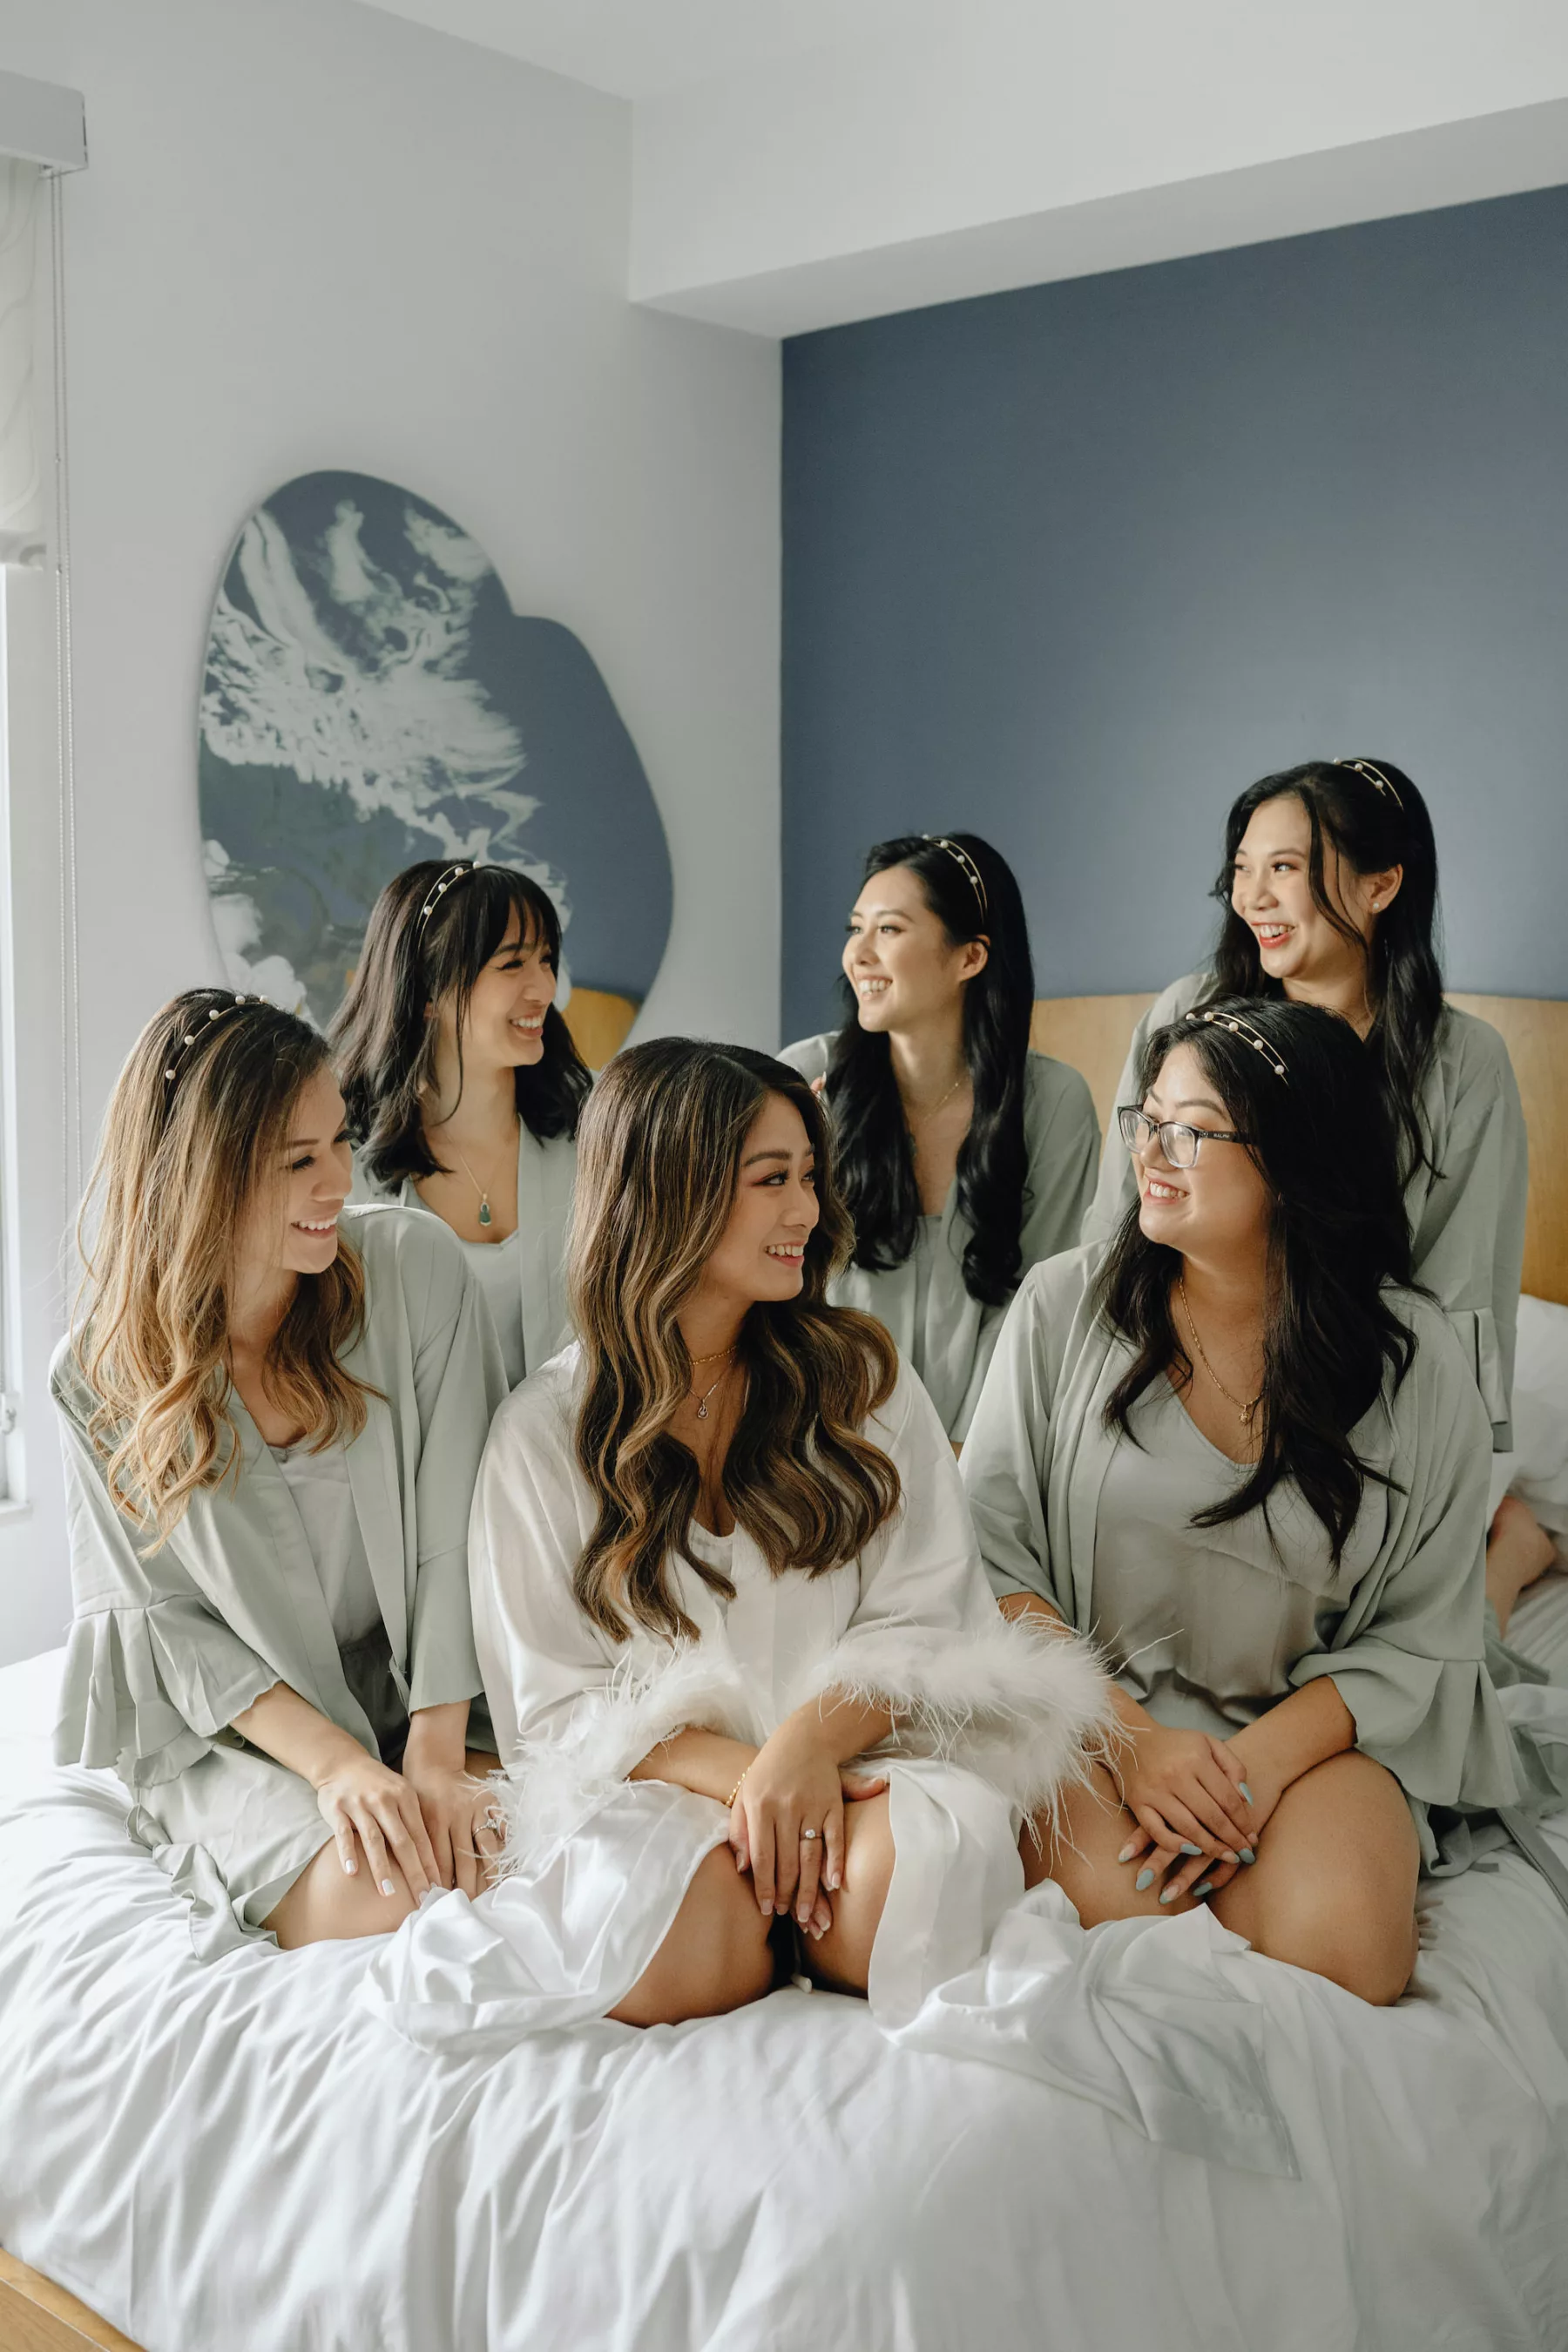 Bride and Bridesmaids Getting Ready Wedding Portrait | Matching Sage Green Robe Ideas | Lakeland Photographer and Videographer J&S Media